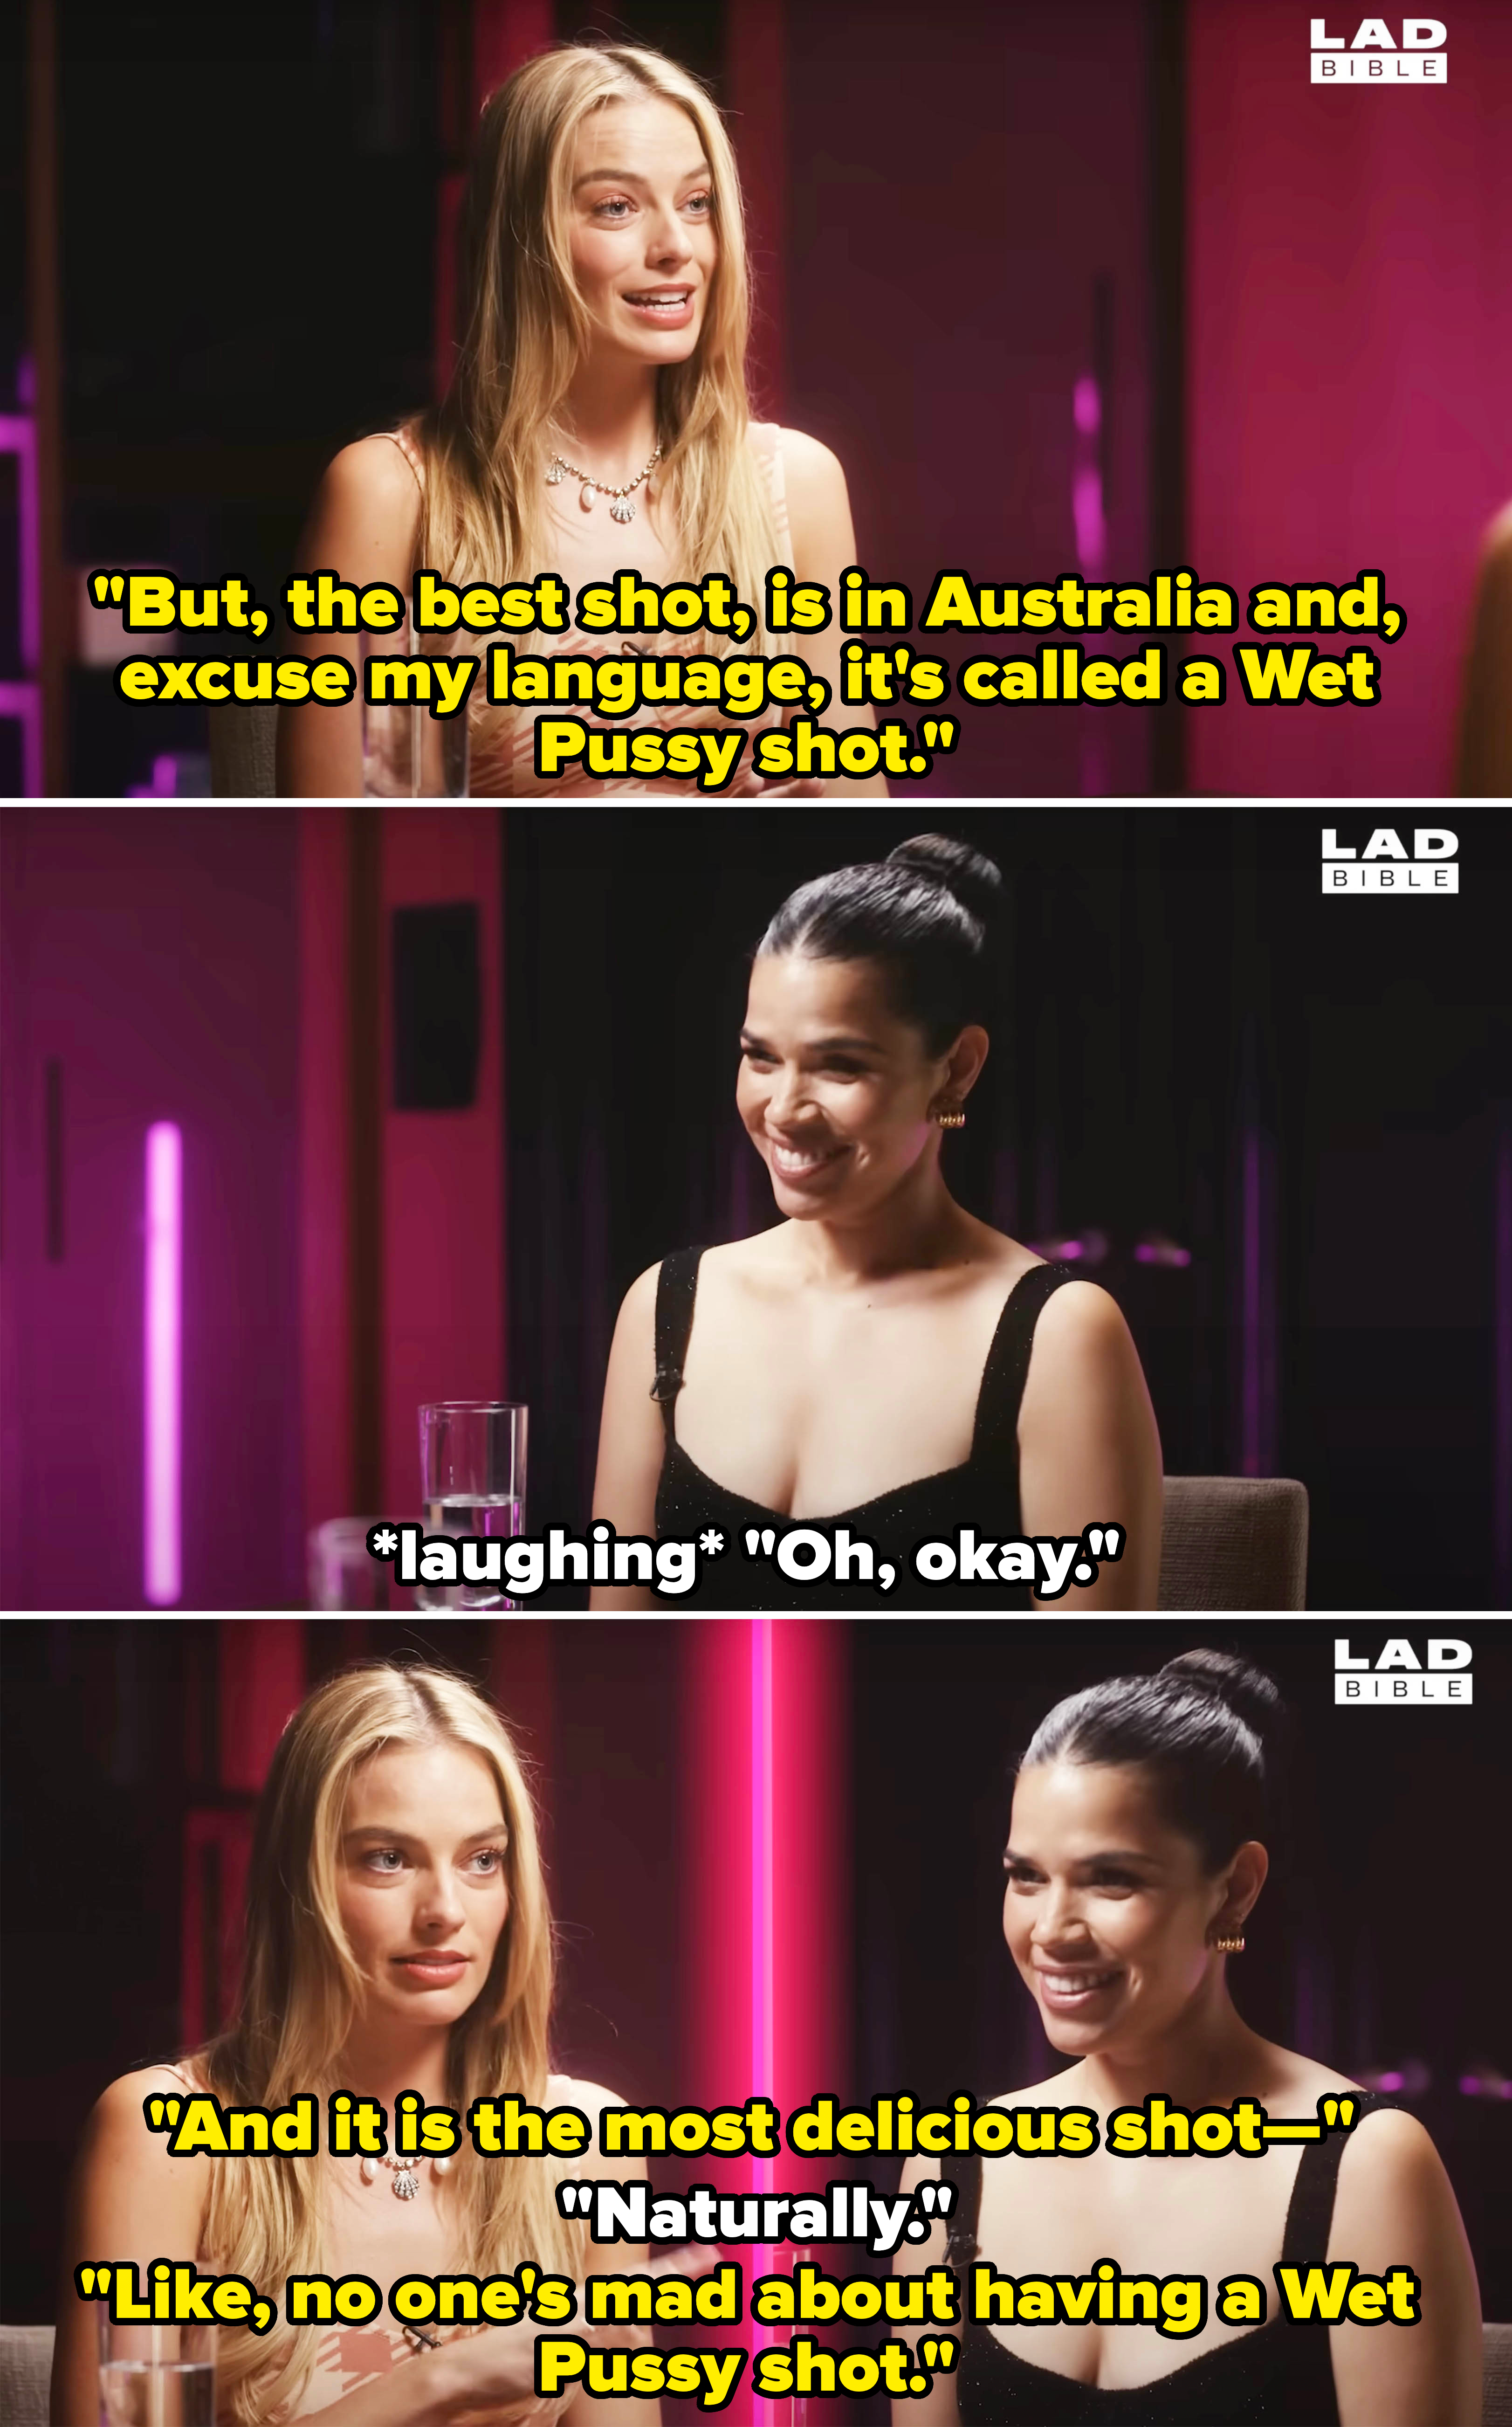 her saying that her favorite shot from australia is called a wet pussy shot and it&#x27;s so delicious